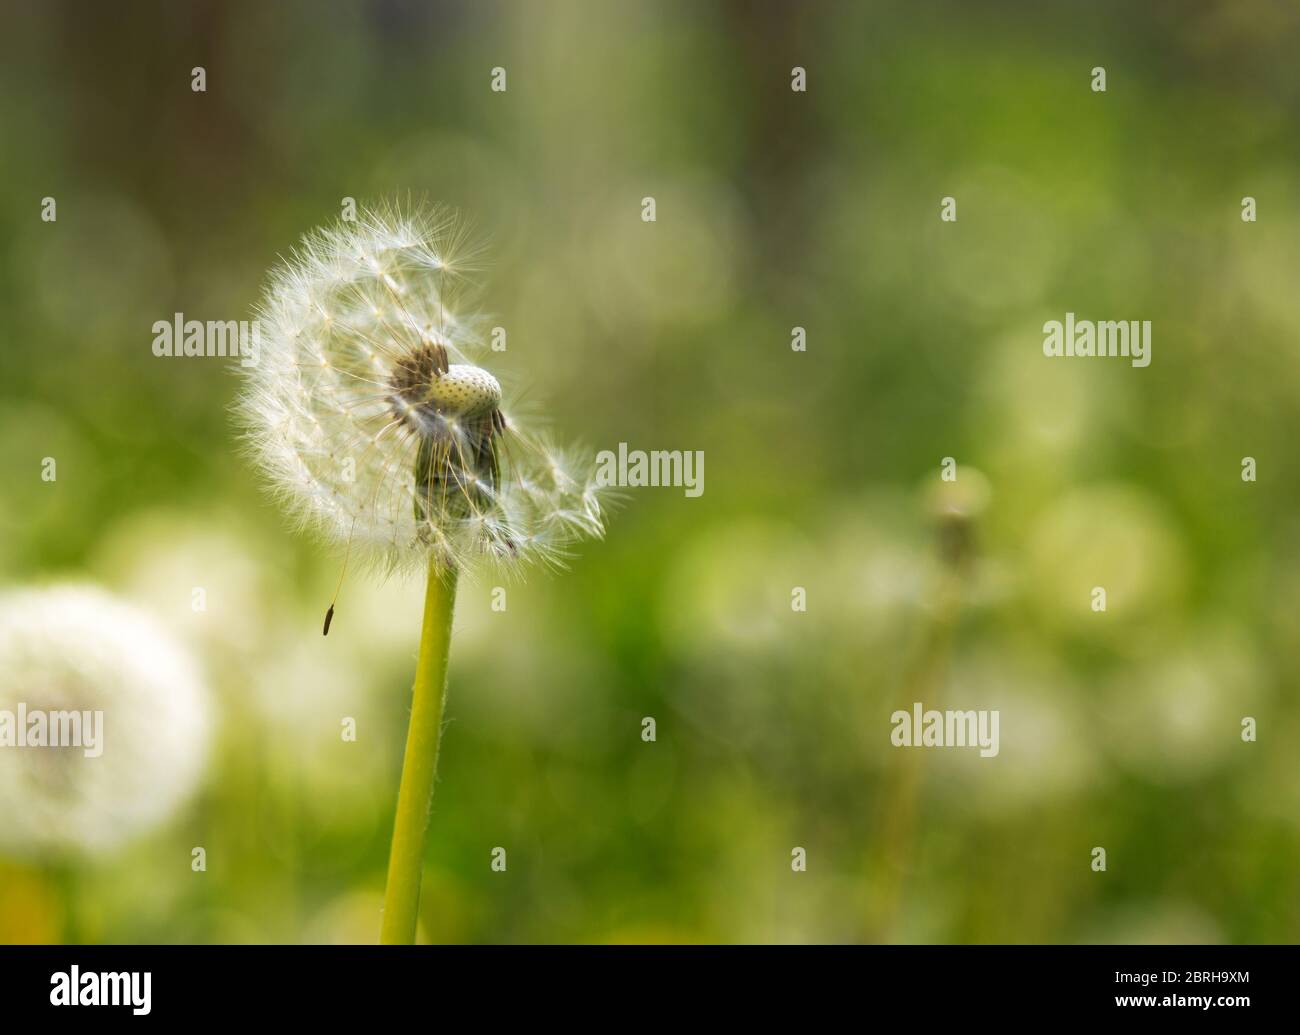 Dandelion seed pod in a natural background. White fluffy dandelions. Stock Photo